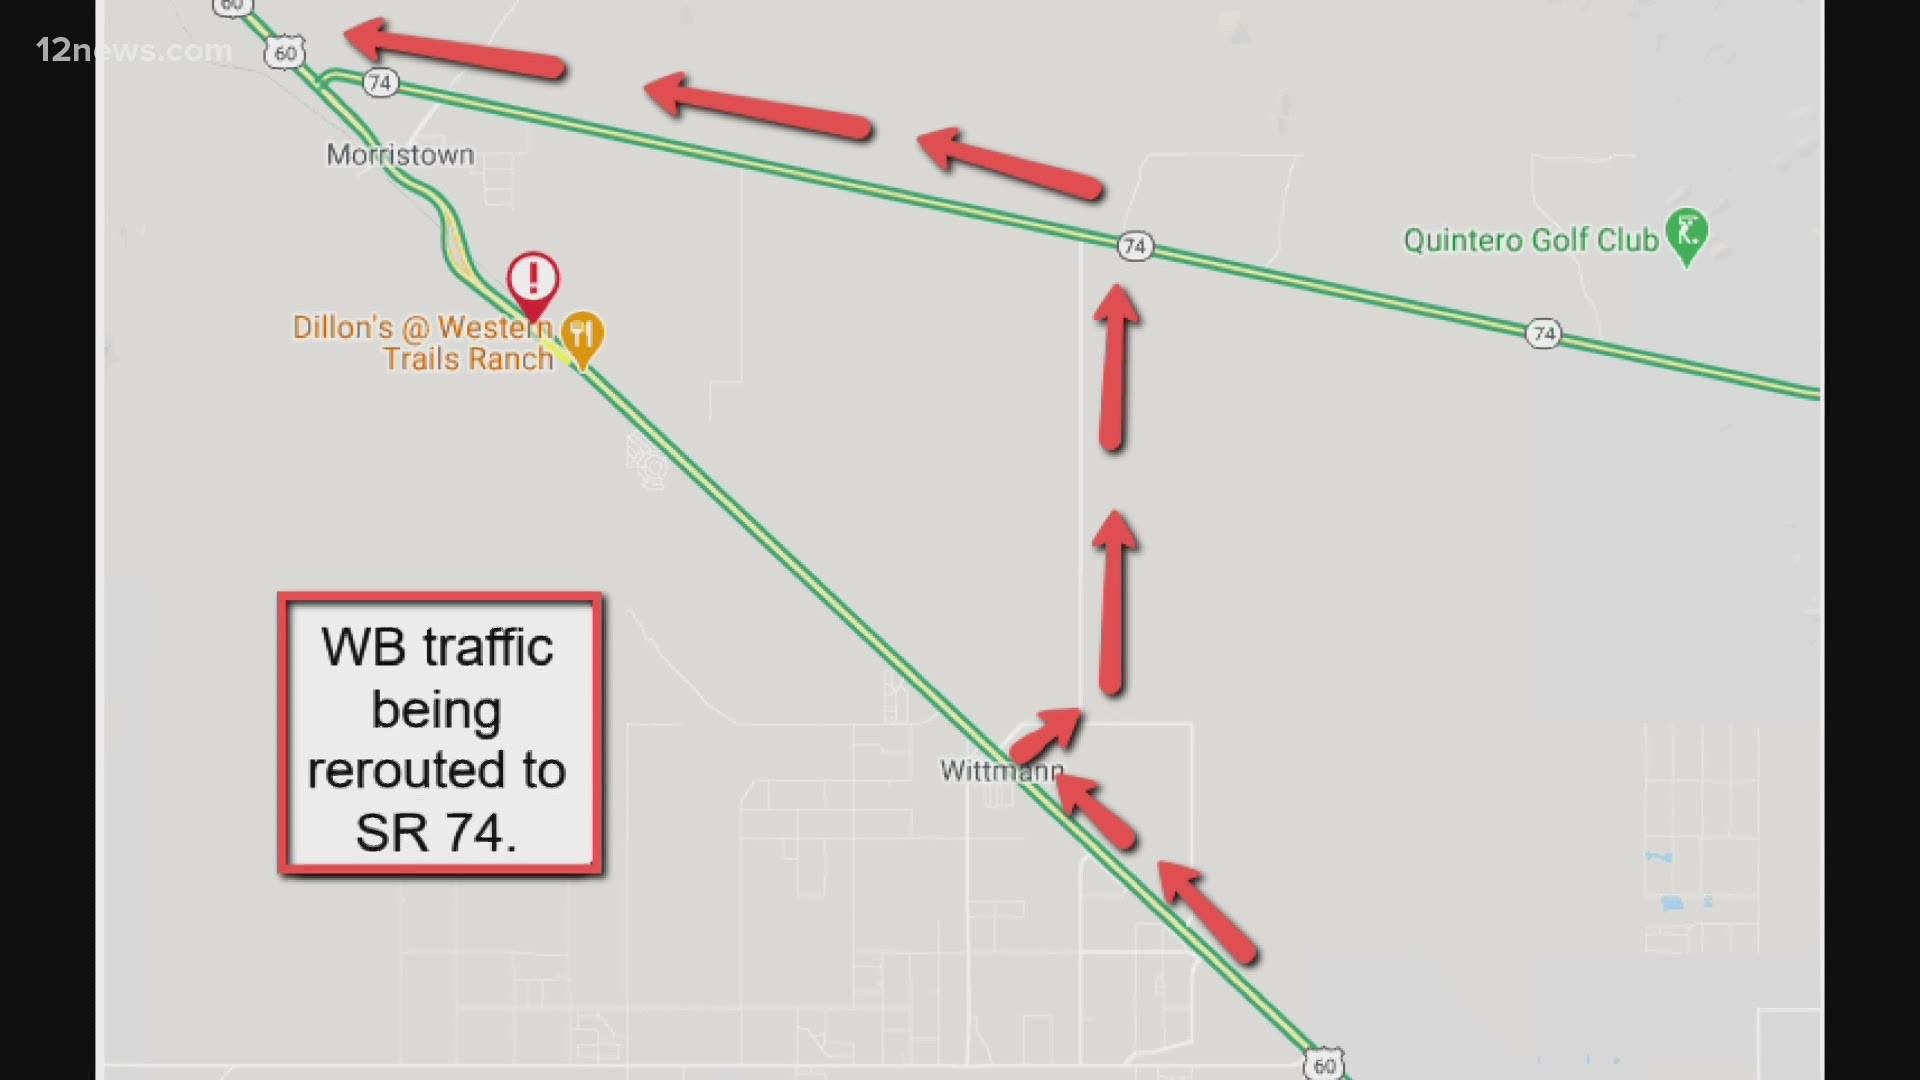 The crash happened around 10:25 p.m. on the westbound lane of US-60 near Morristown, about 55 miles northwest of Phoenix.